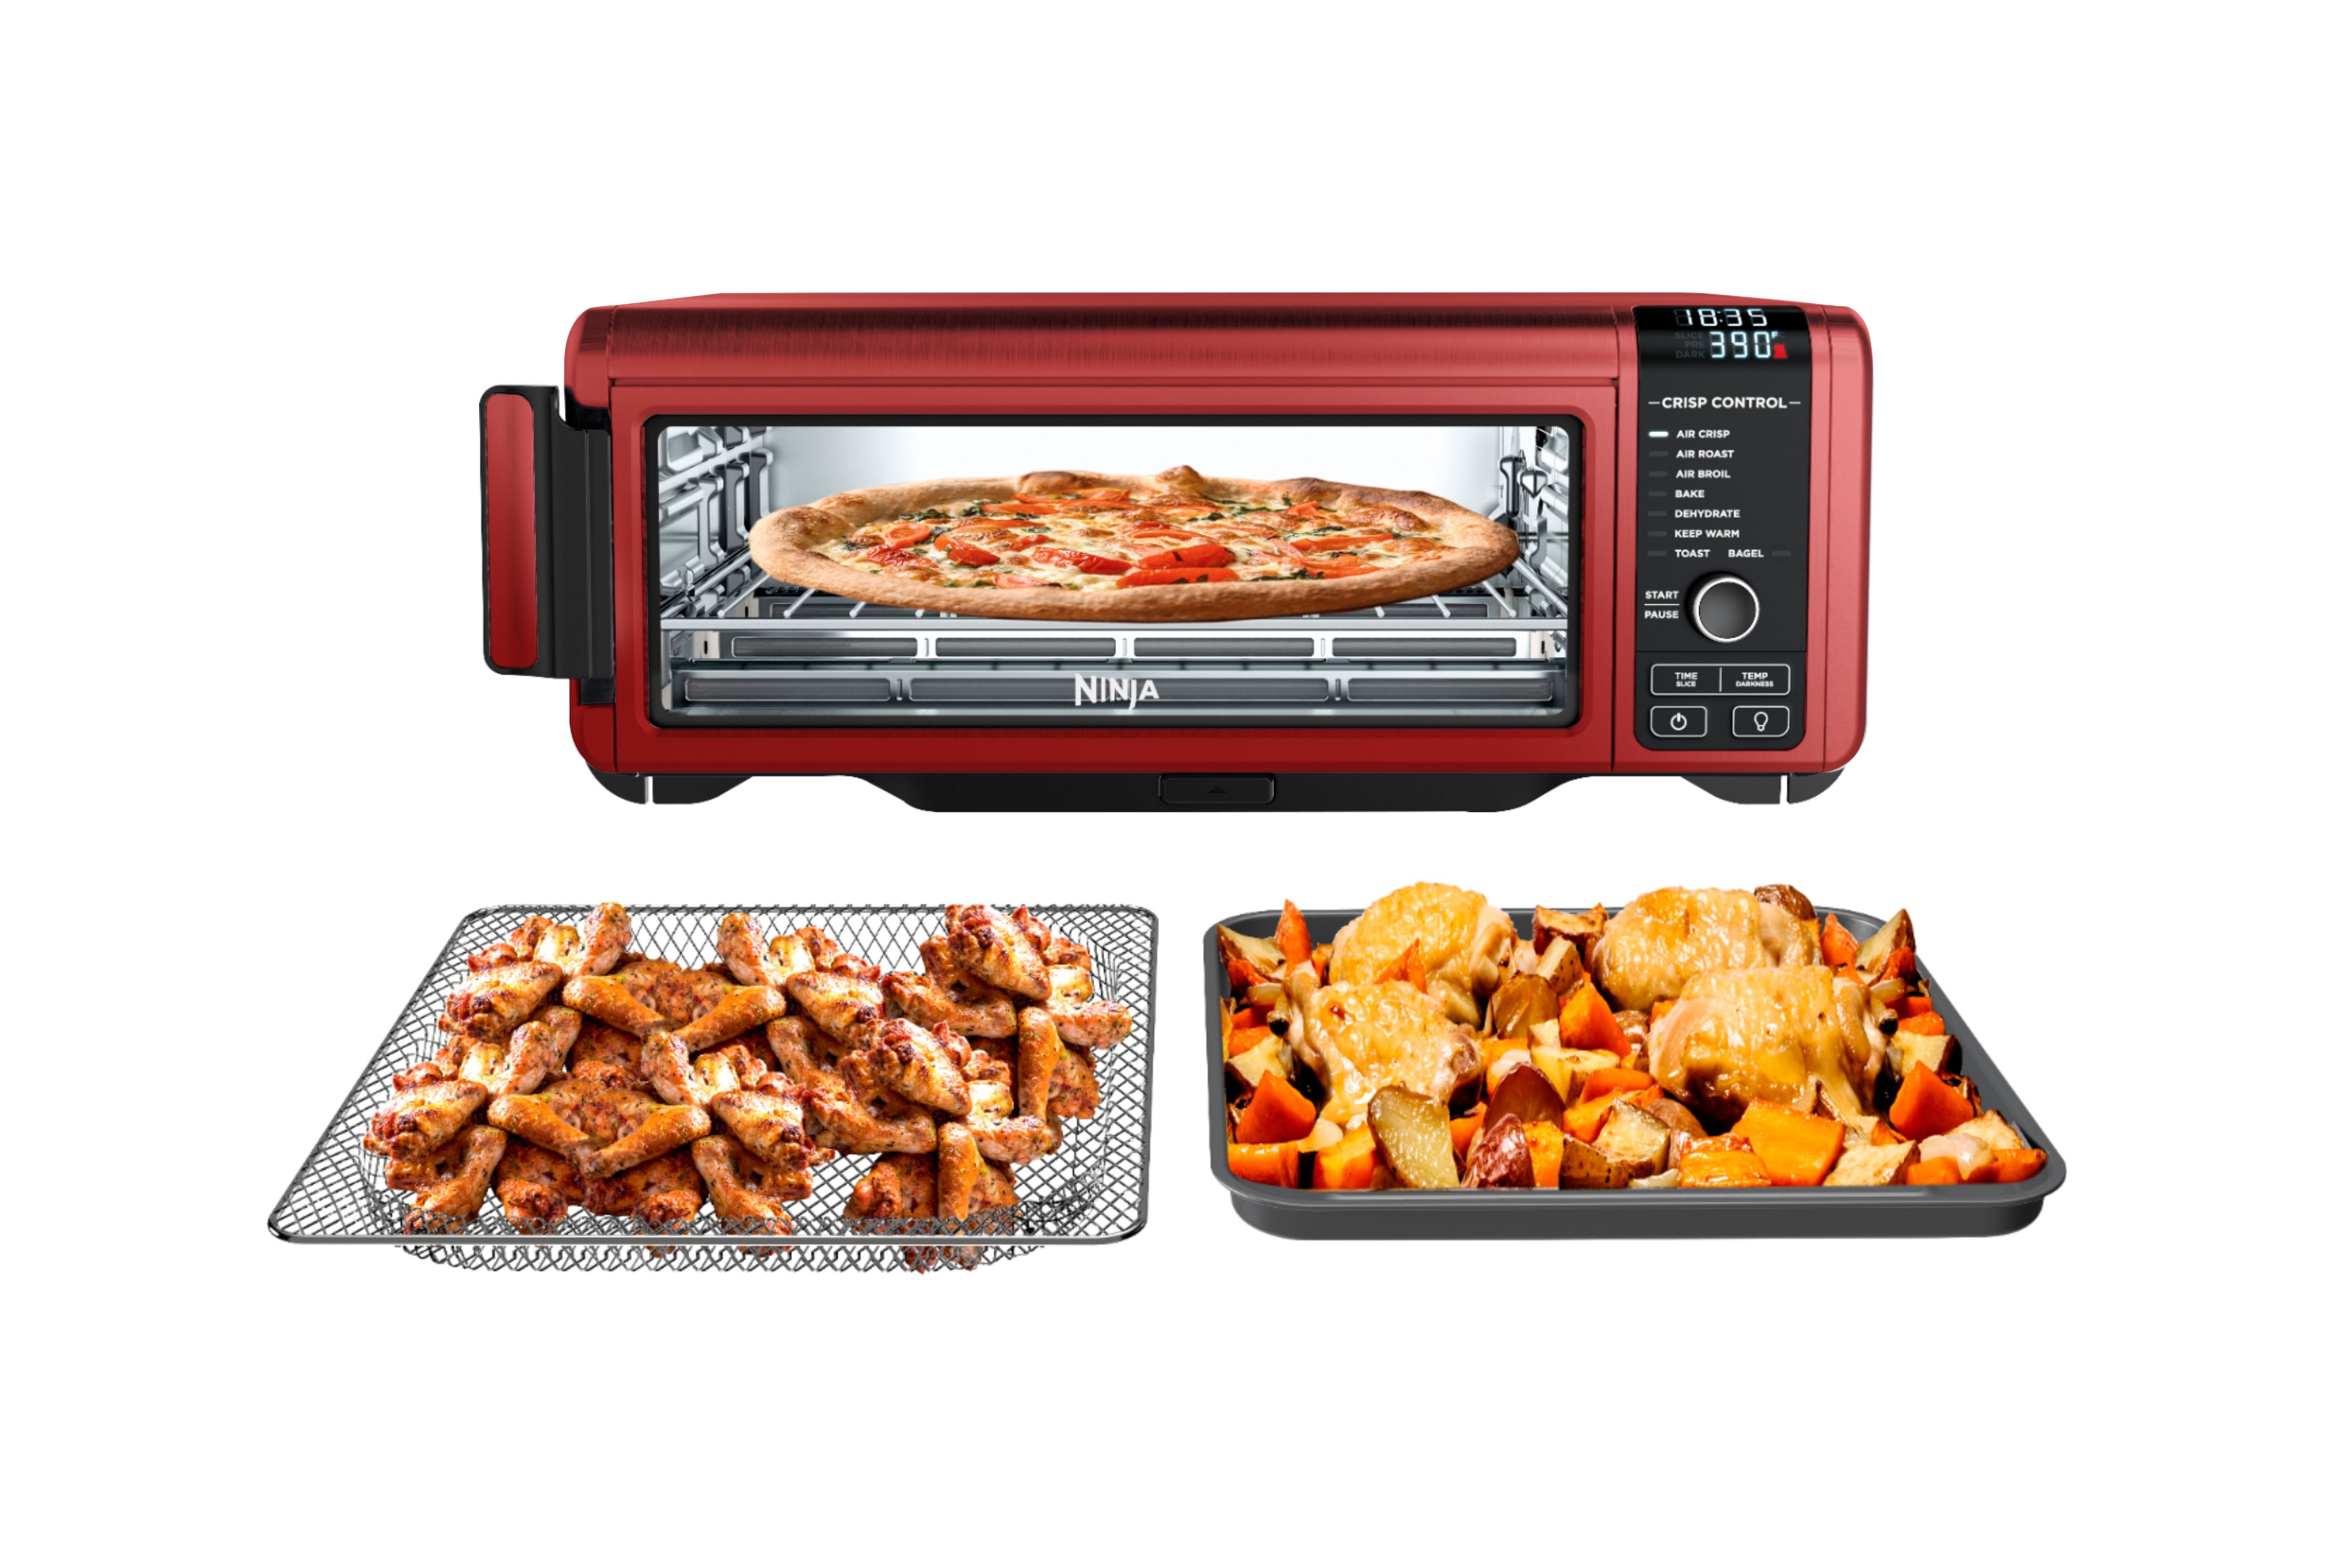 Ninja SP101 Digital Air Fry Countertop Oven with 8-in-1 with Air Fry B –  Amazing Electronics